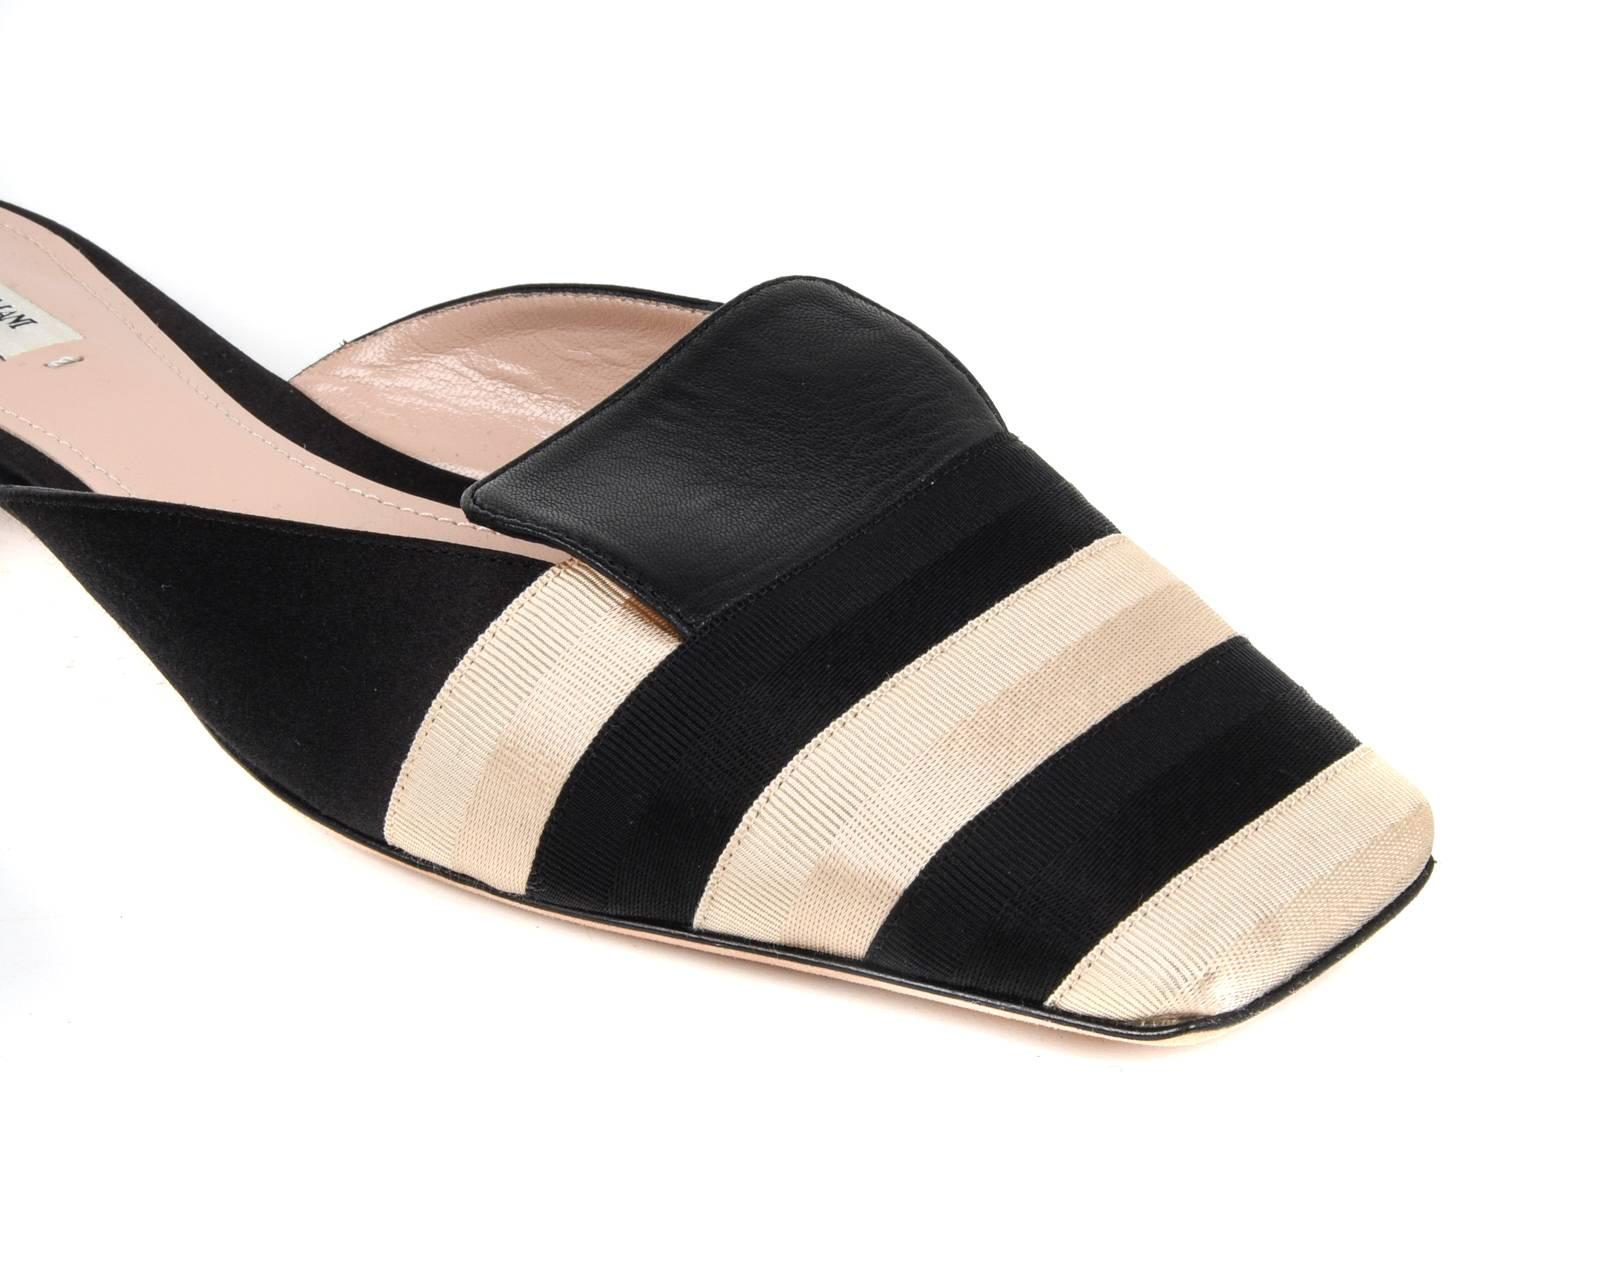 Guaranteed  authentic Giorgio Armani sleek black and gold slide. 
Alternating black and gold grosgrain ribbon with a squared toe.
Beautifully detailed heel created with gold sides and rear black zig zag.
The perfect summer slide.
NEW or NEVER